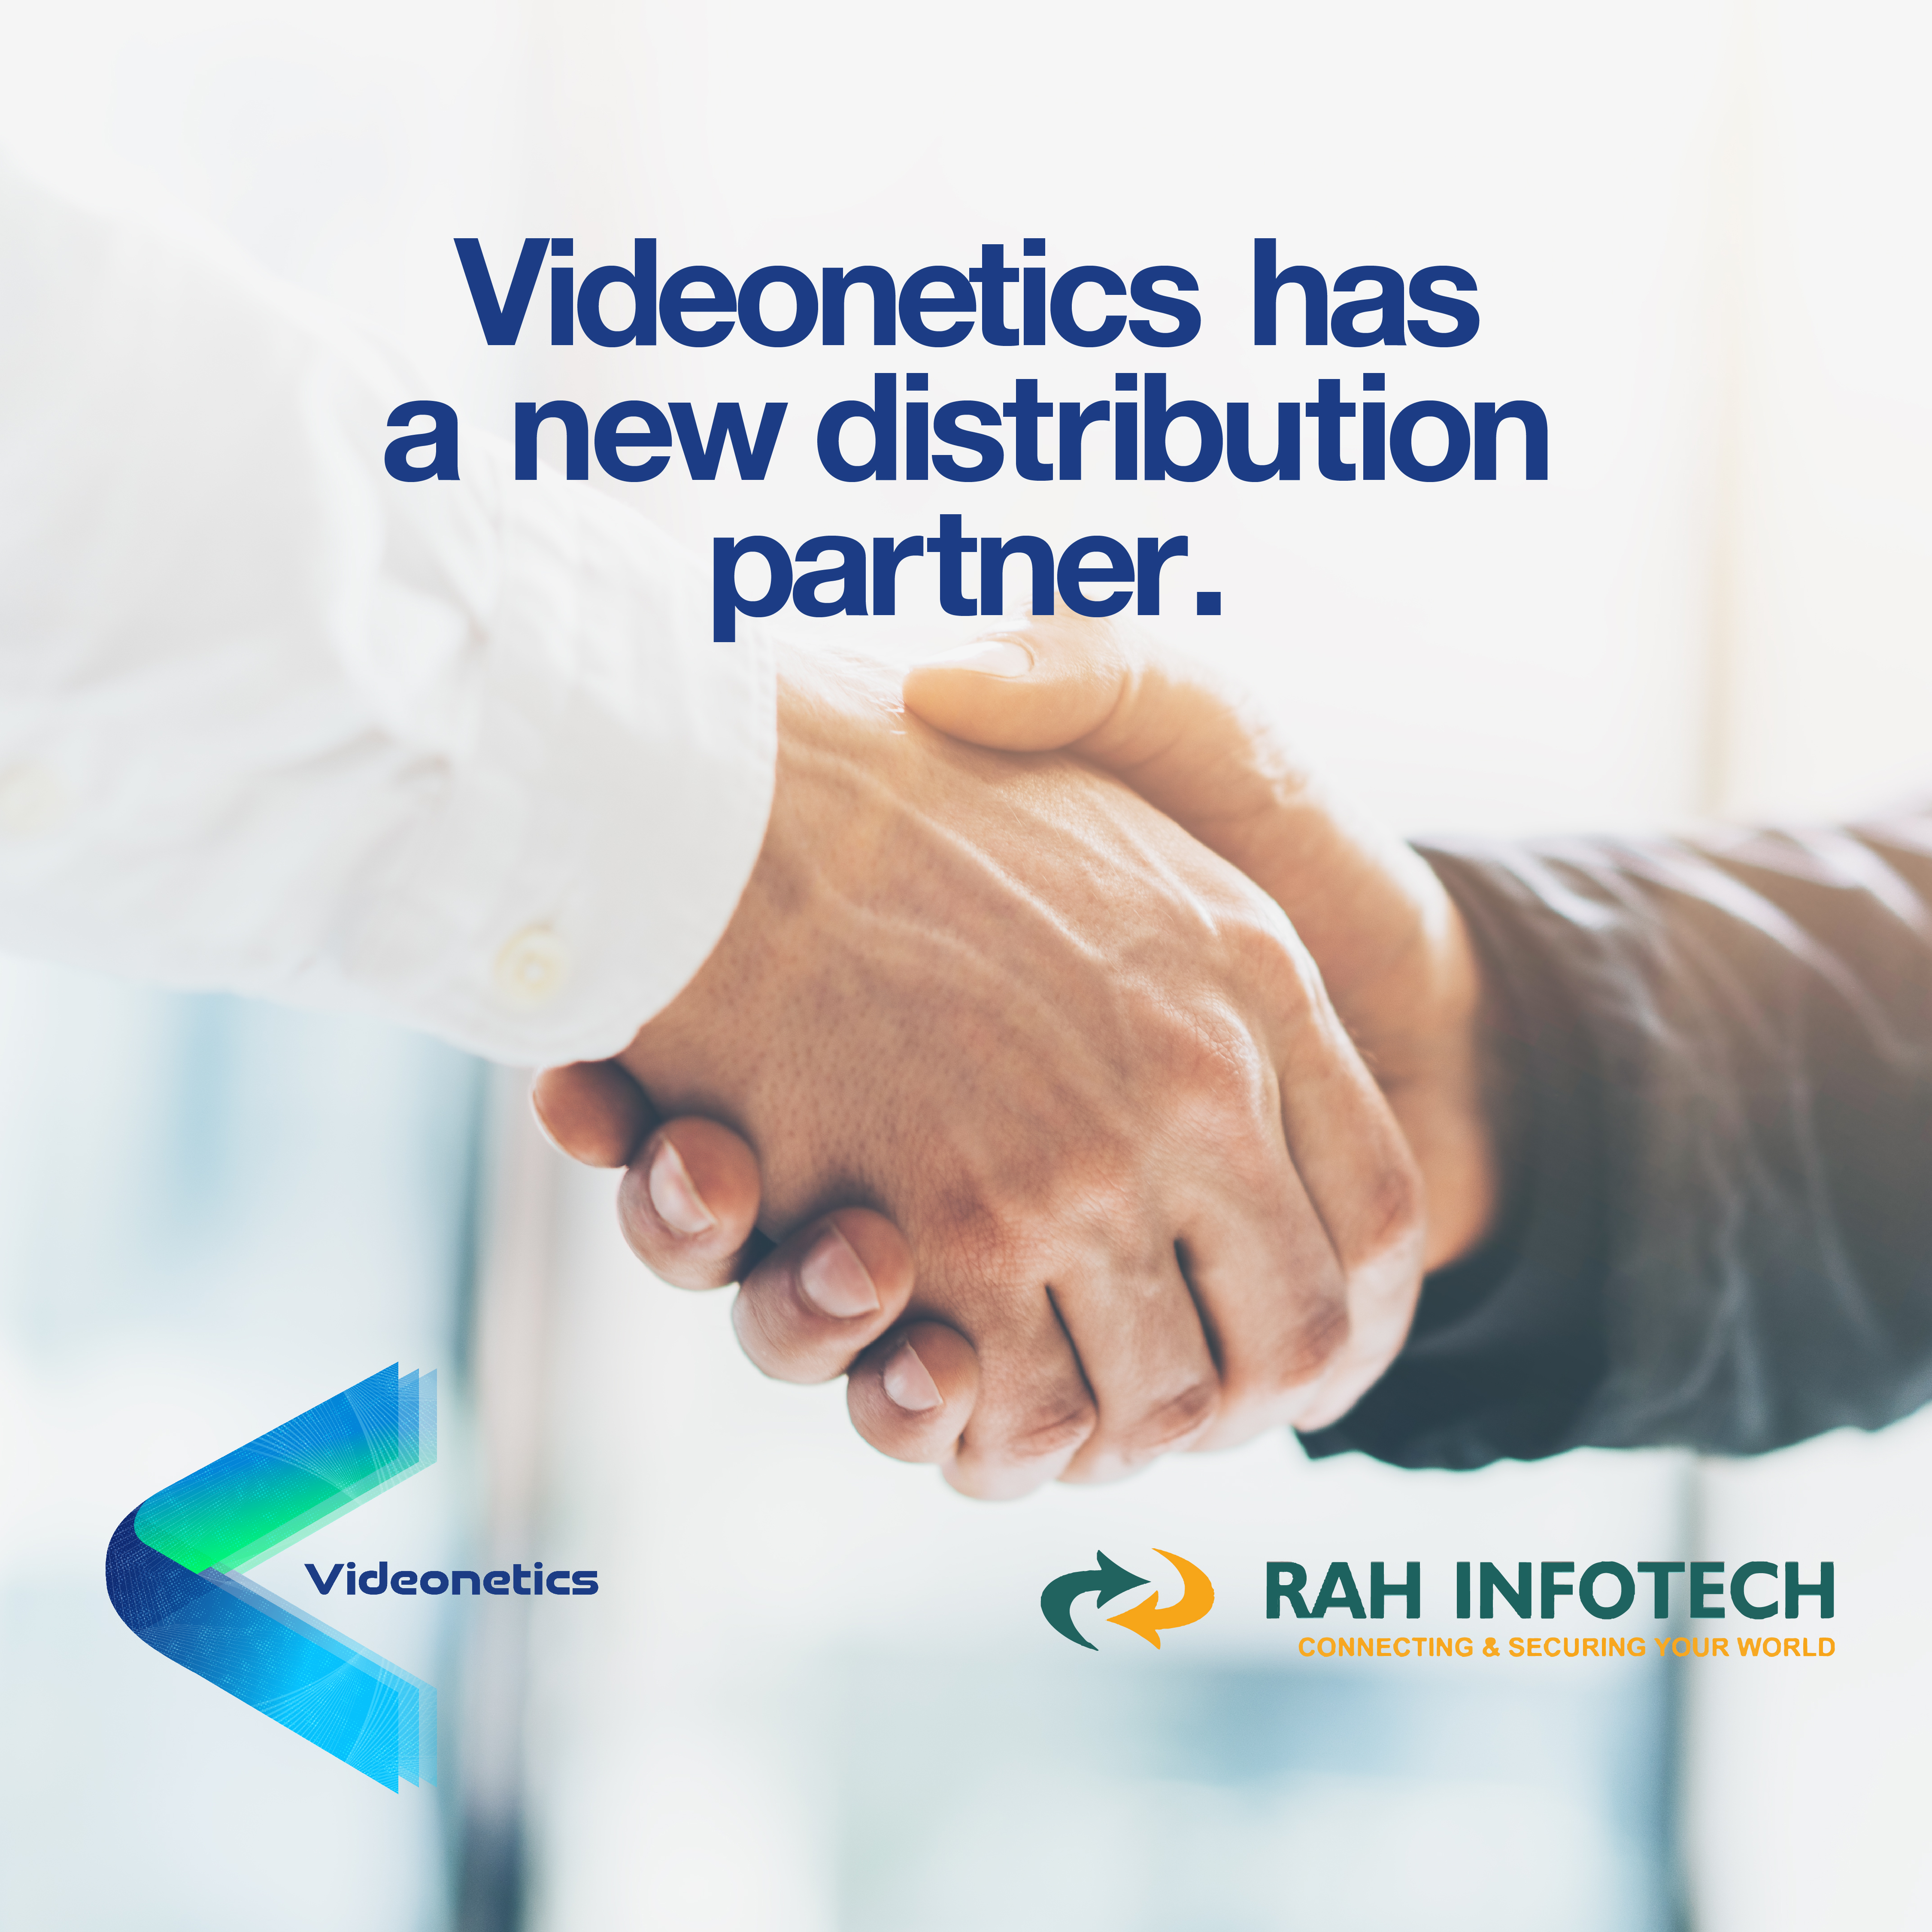  RAH Infotech Partners with Videonetics for End-to-End Video Management Solutions